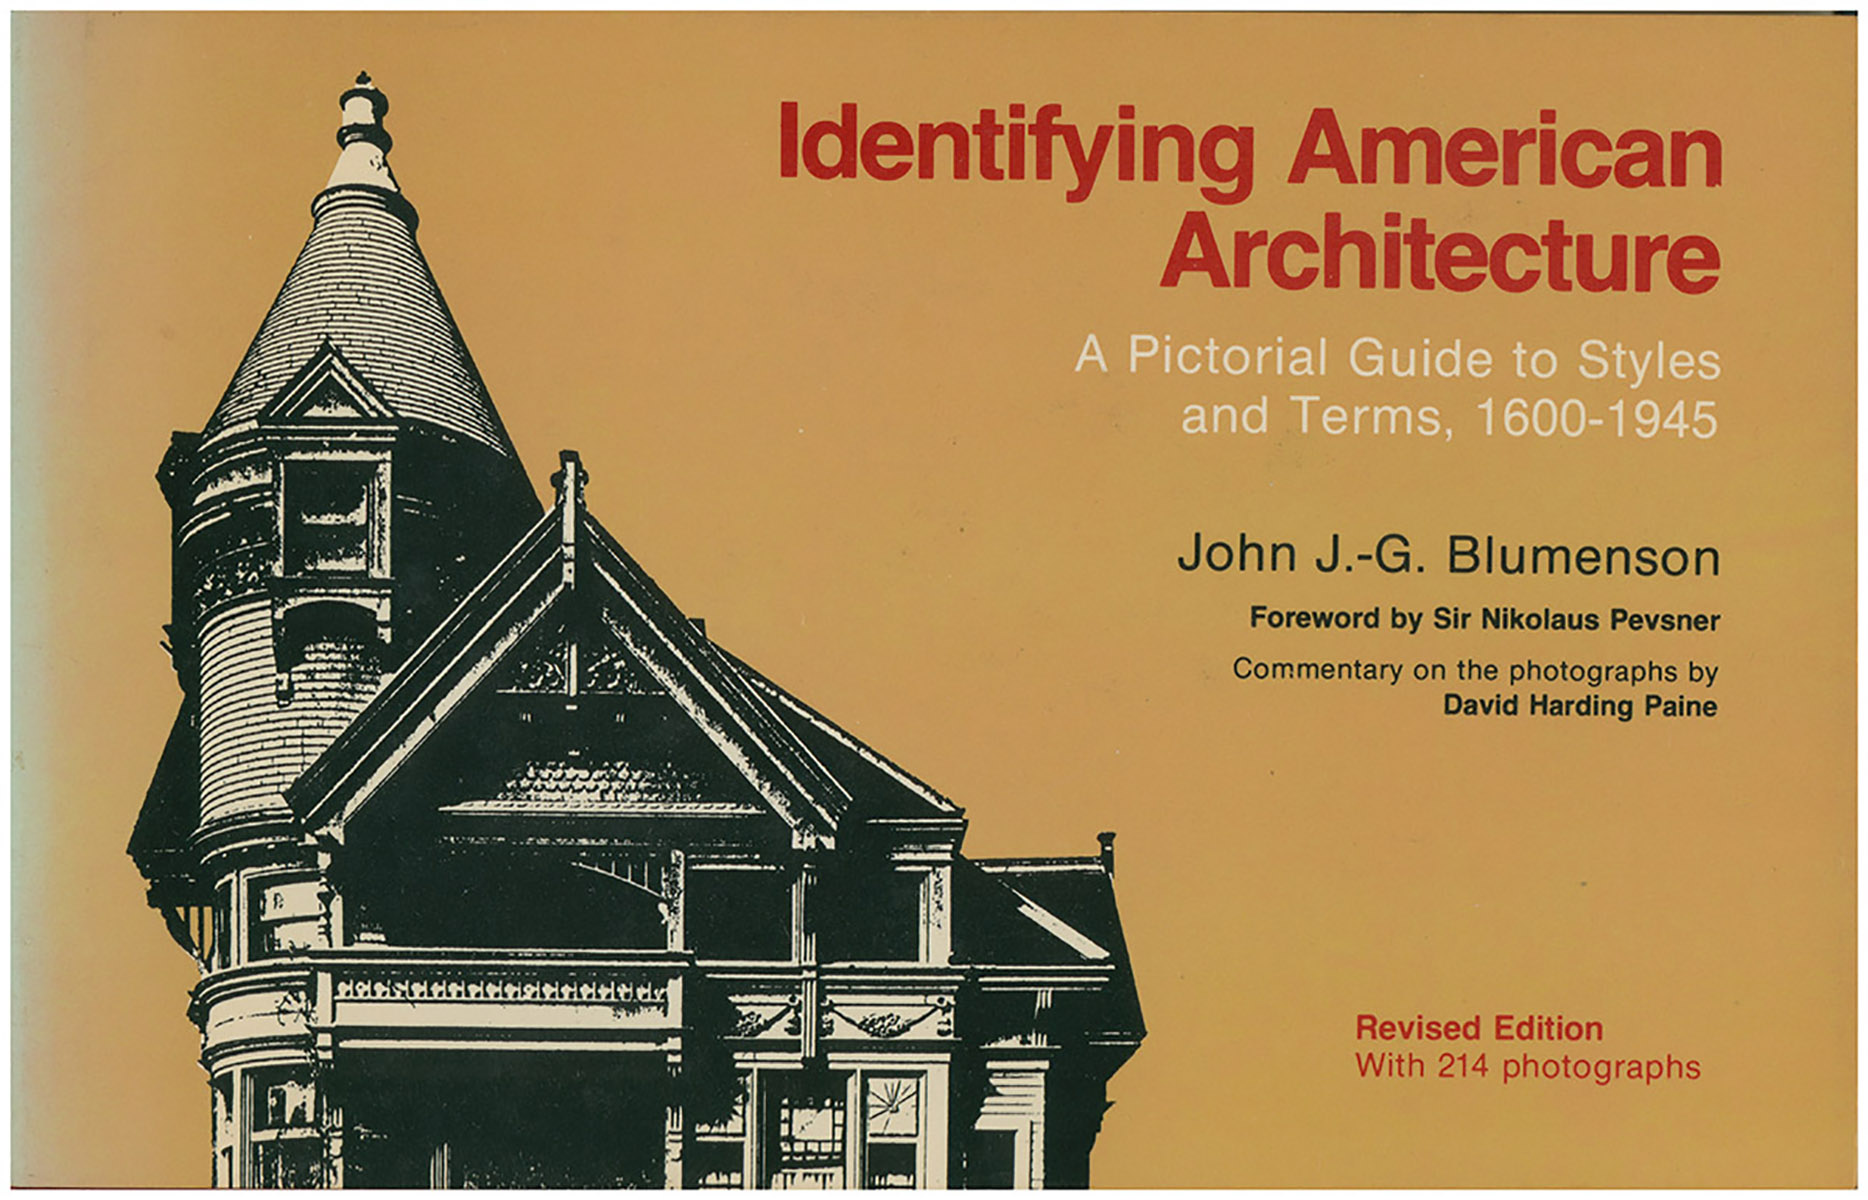 Blumenson, John C. - Identifying American Architecture: A Pictorial Guide to Styles and Terms, 1600-1945